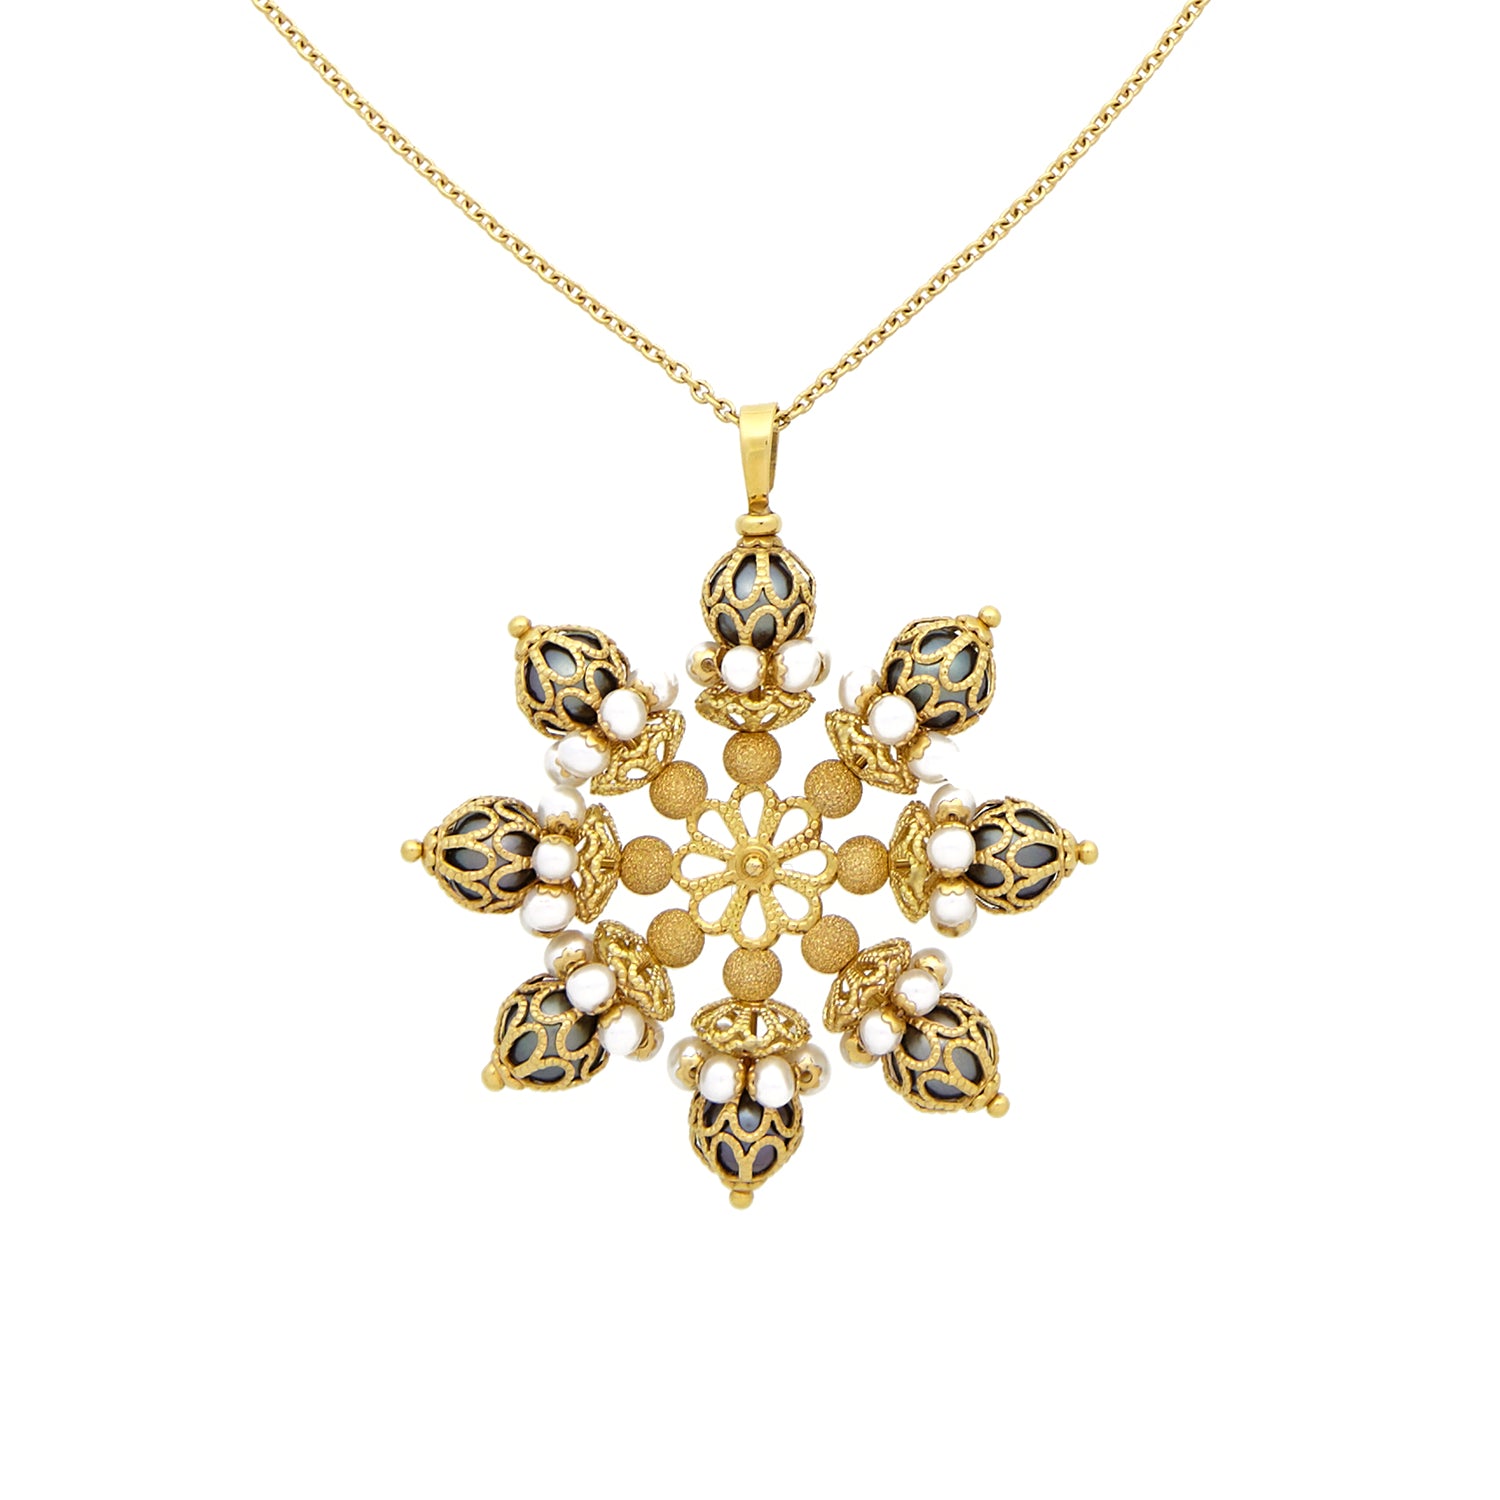 YELLOW GOLD NECKLACE WITH STAR SHAPE PENDANT